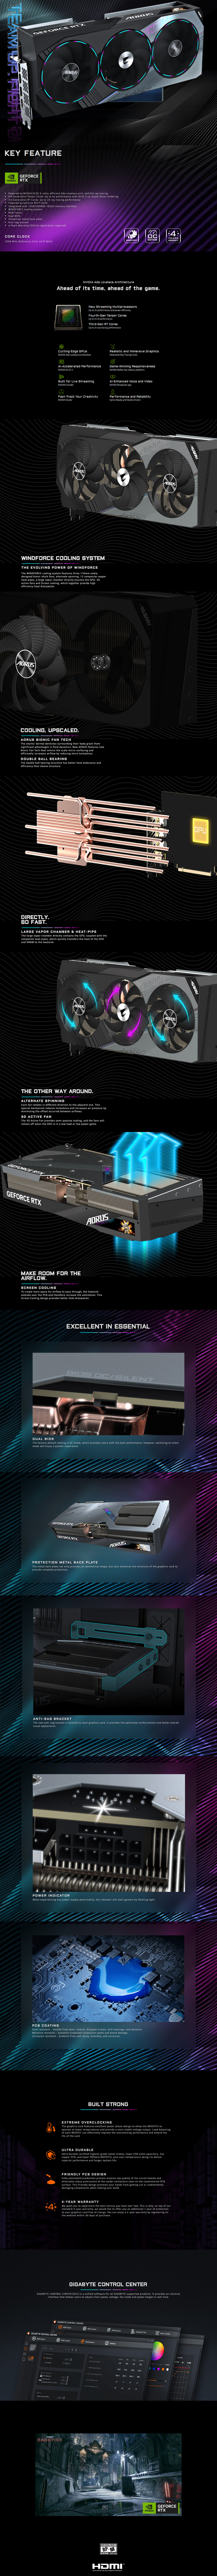 A large marketing image providing additional information about the product Gigabyte GeForce RTX 4070 Aorus Master 12GB GDDR6X - Additional alt info not provided